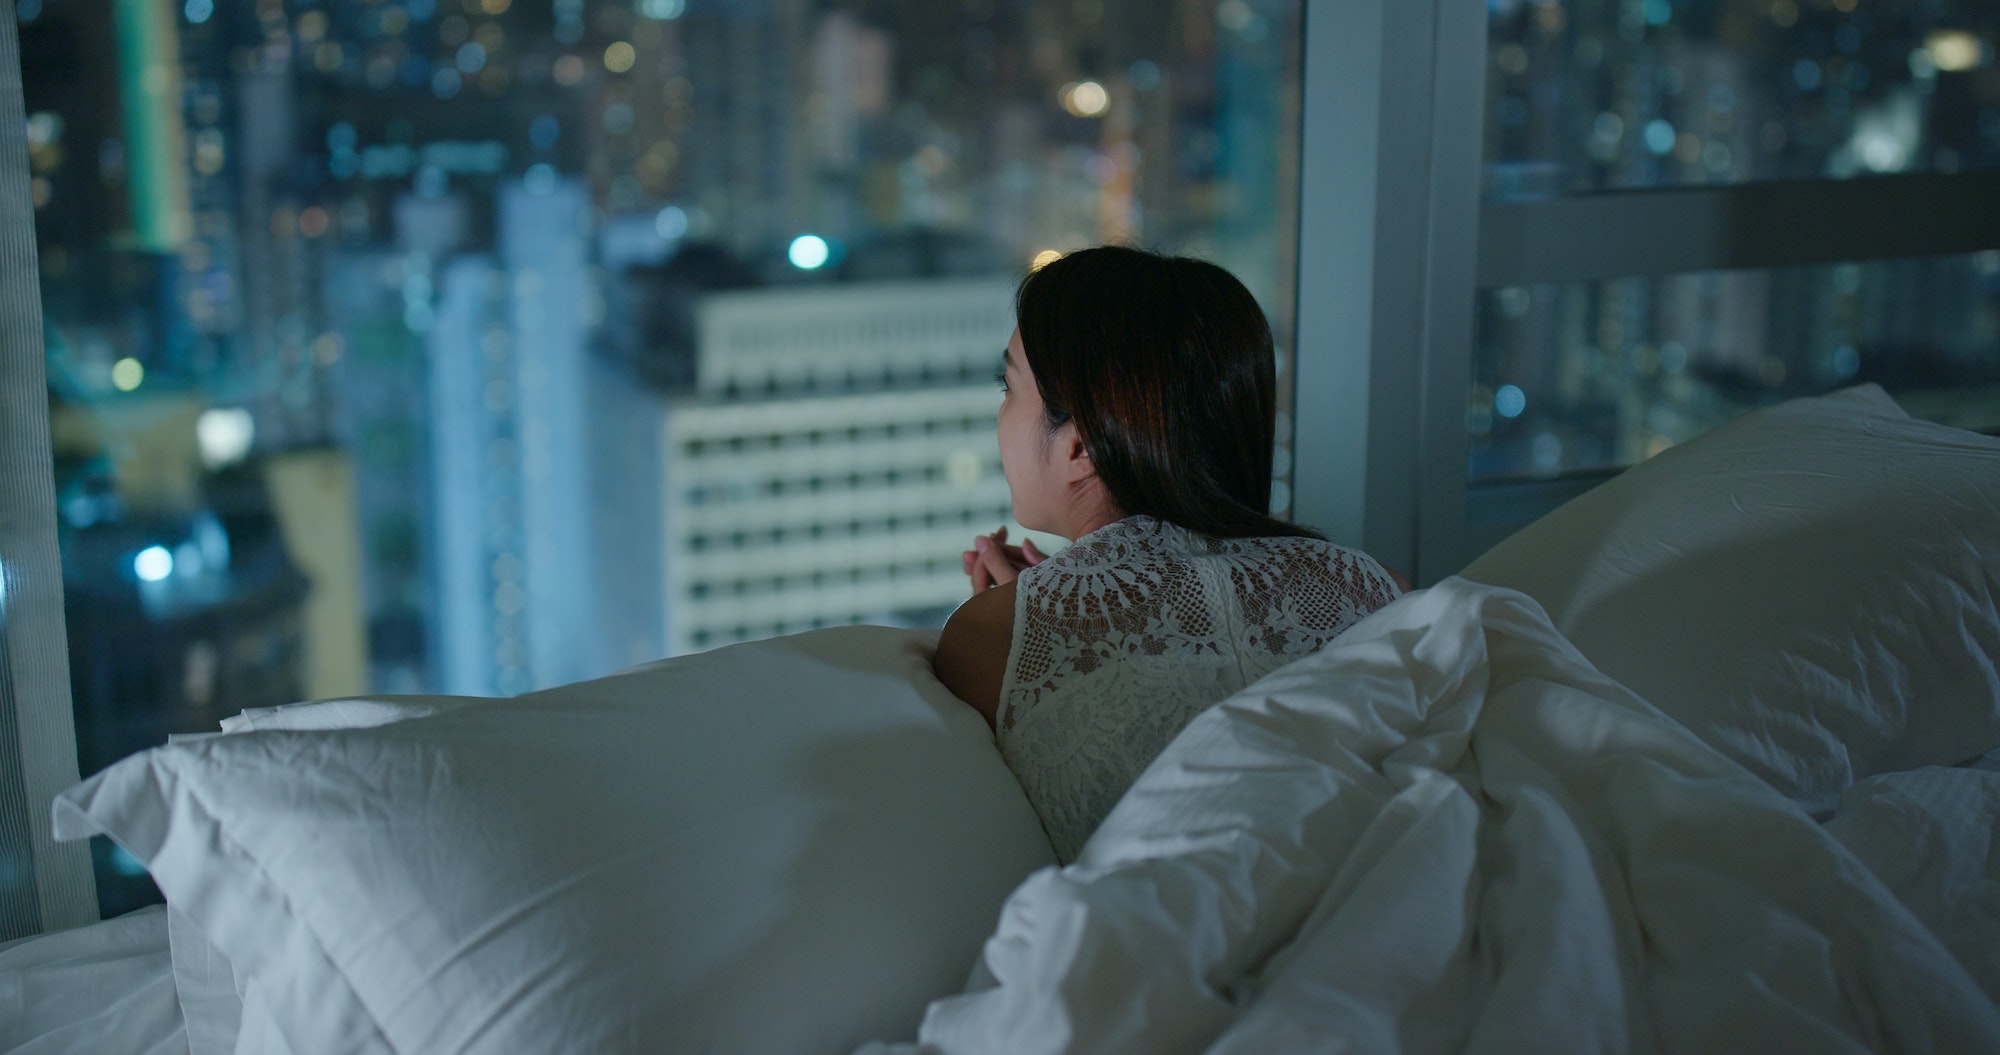 Woman look at the city view and lying on bed at night